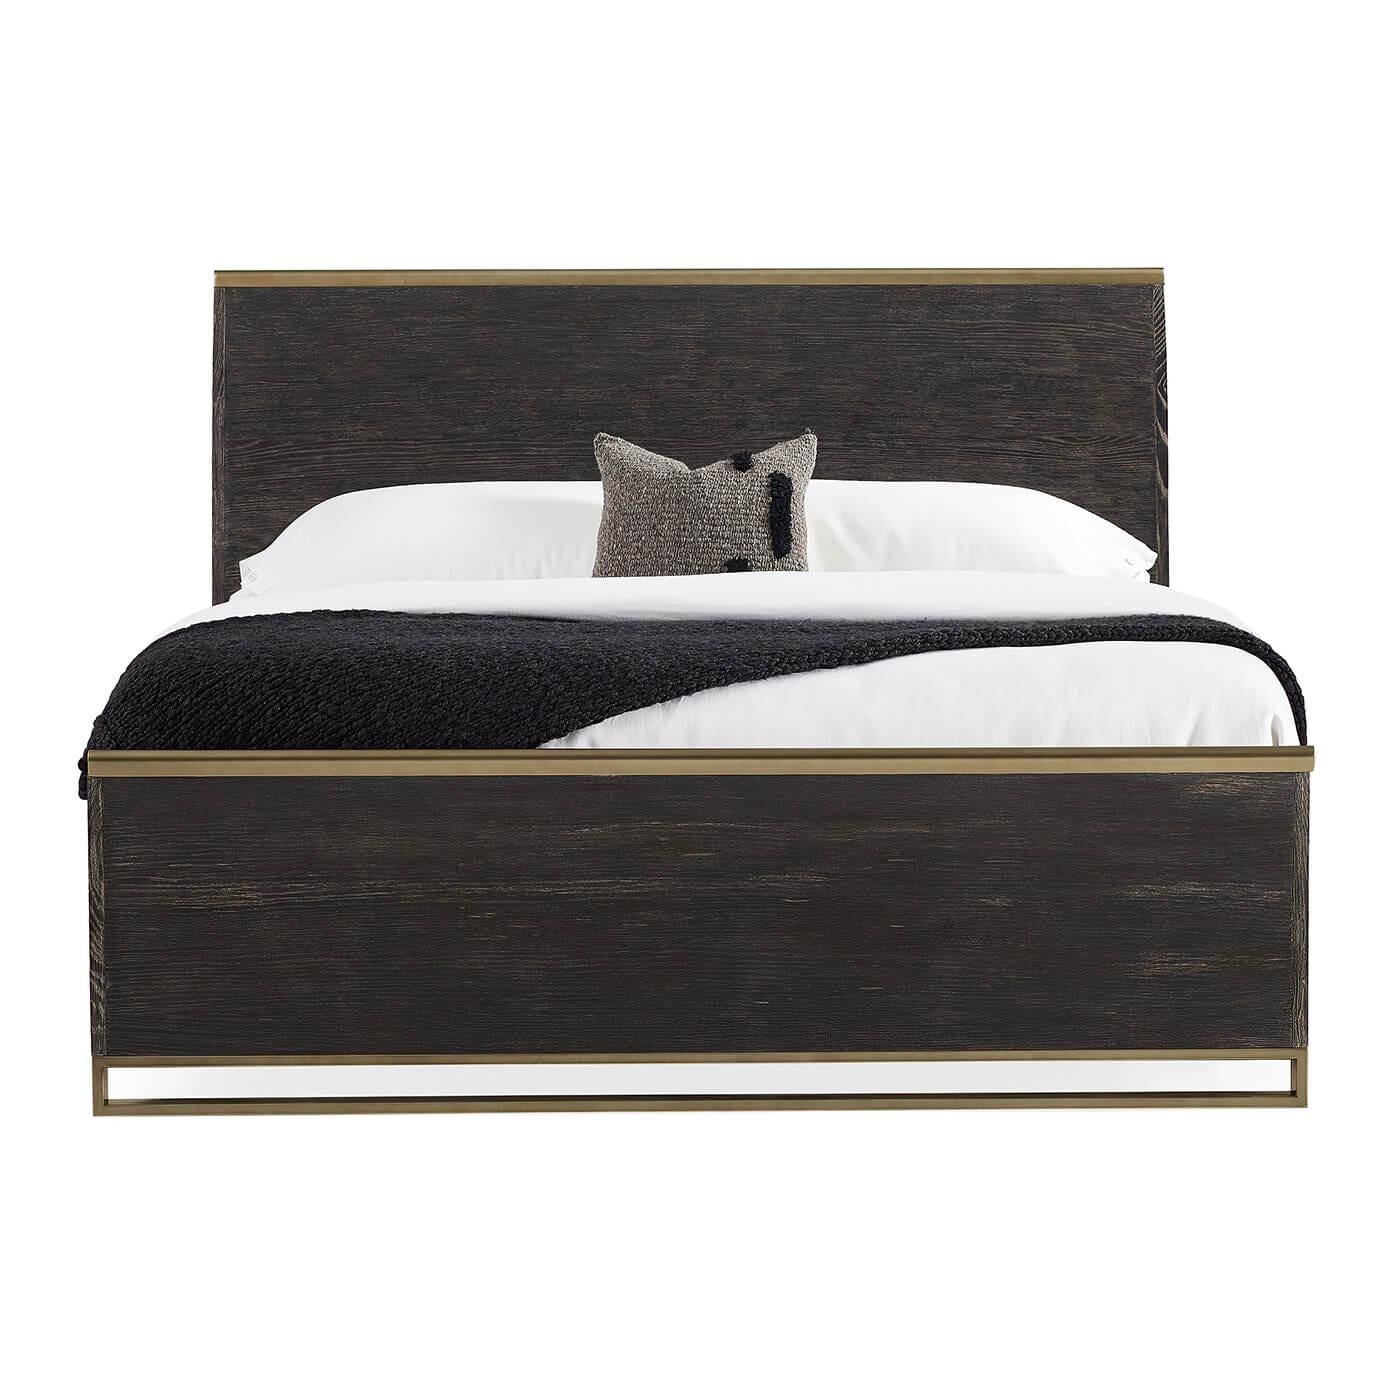 A modern cerused oak king bed with a metal rail in bronze metallic paint outlining the top of both the headboard and footboard. The headboard and footboard have a slightly curved profile. 
Dimensions
80